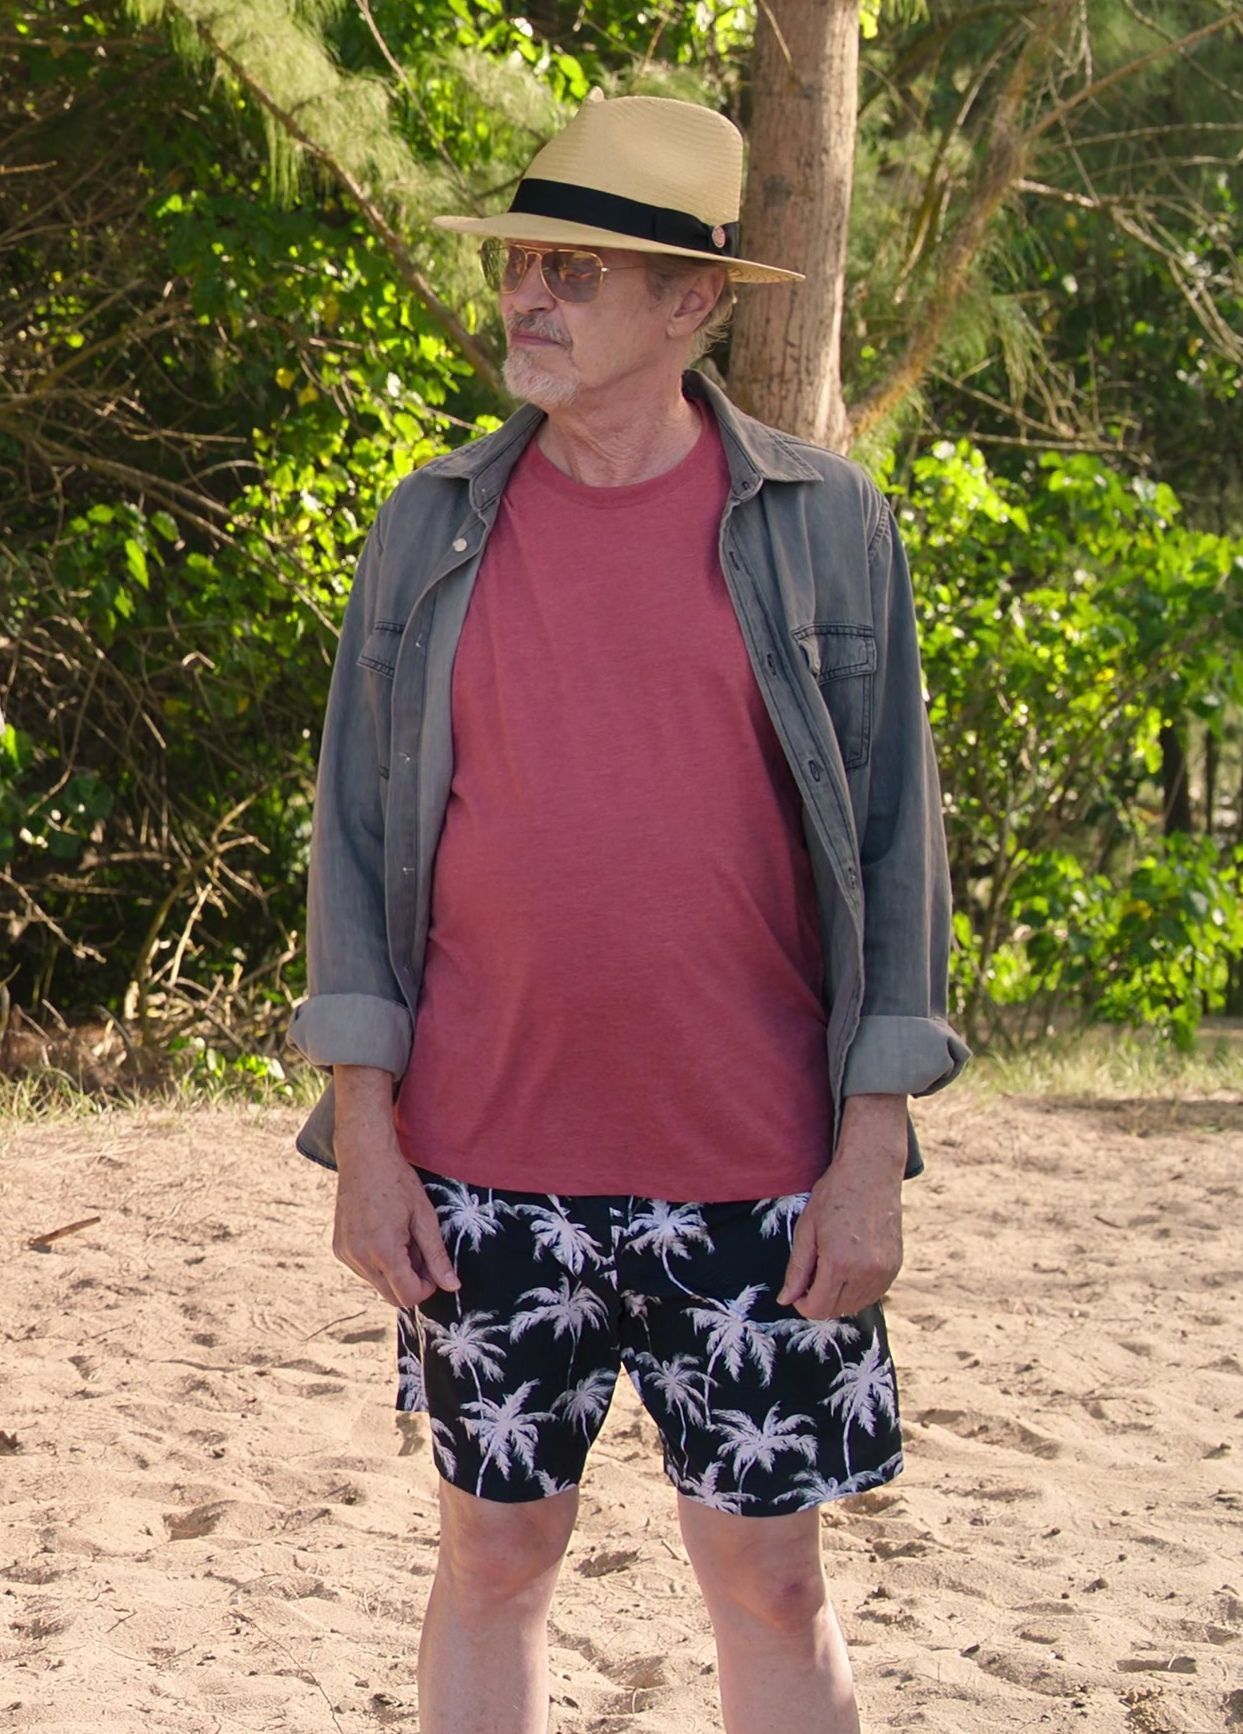 Worn on Vacation Friends 2 (2023) Movie - Palm Print Black Shorts Worn by Steve Buscemi as Reese Hackford